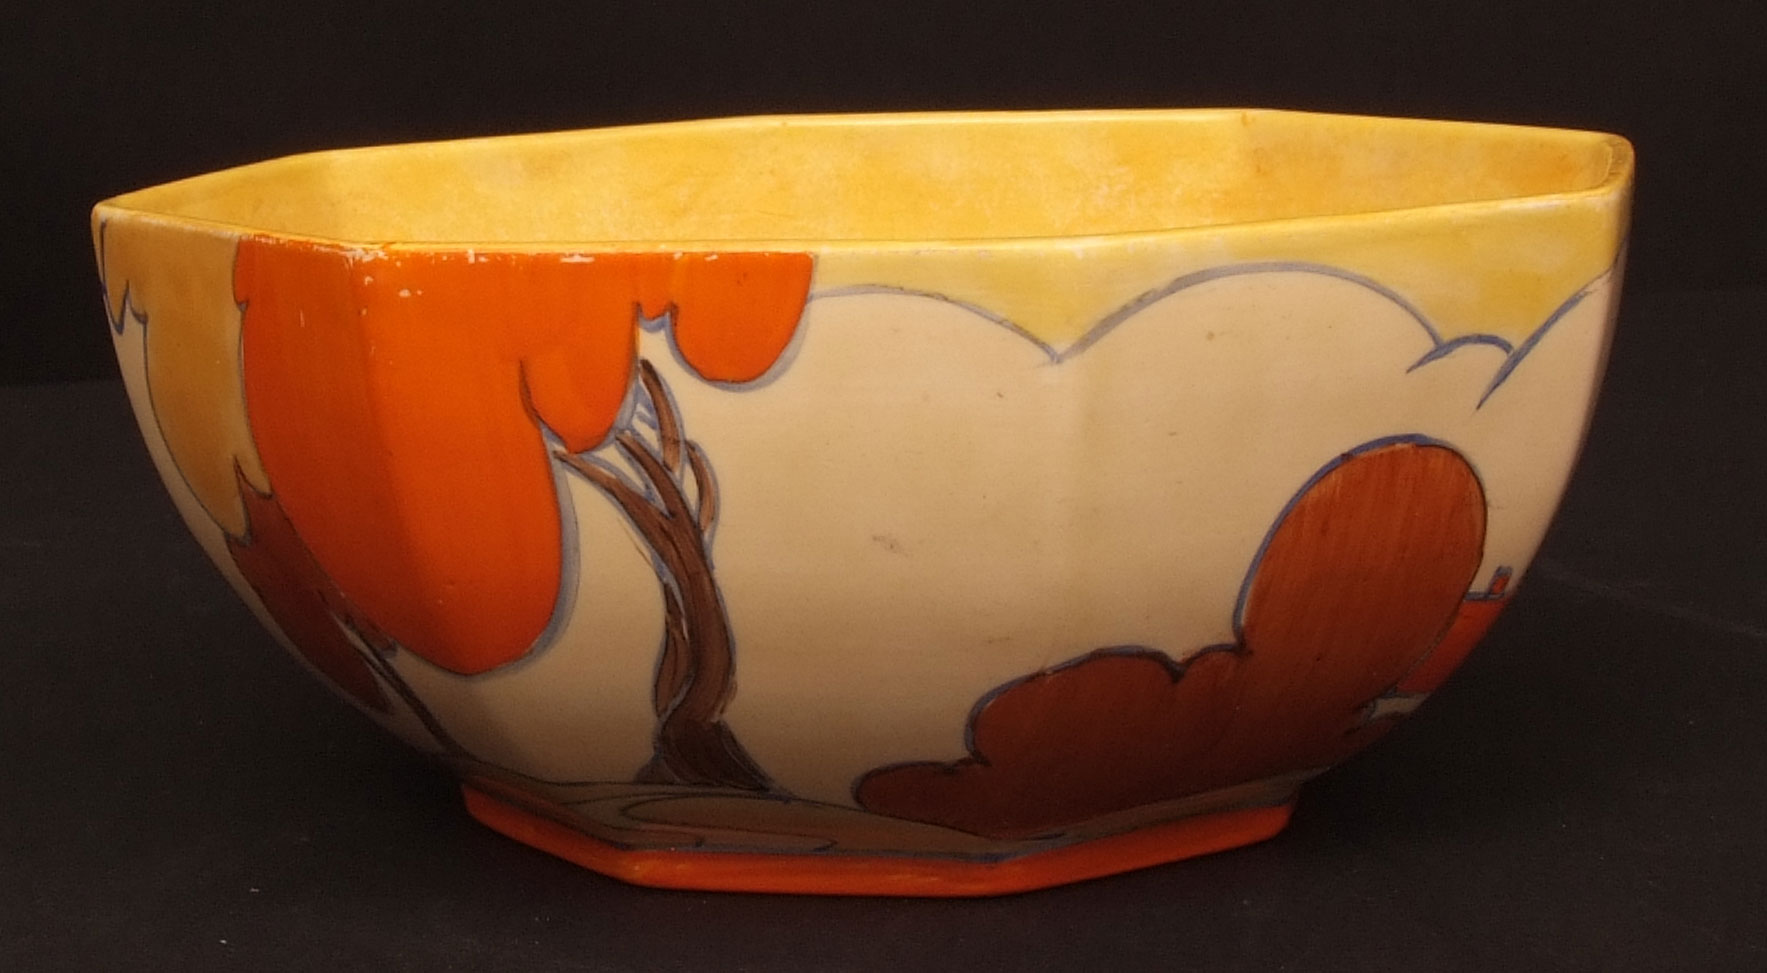 Clarice Cliff octagonal bowl, decorated with the "Balloon Trees" pattern, 7" wide - Image 5 of 6